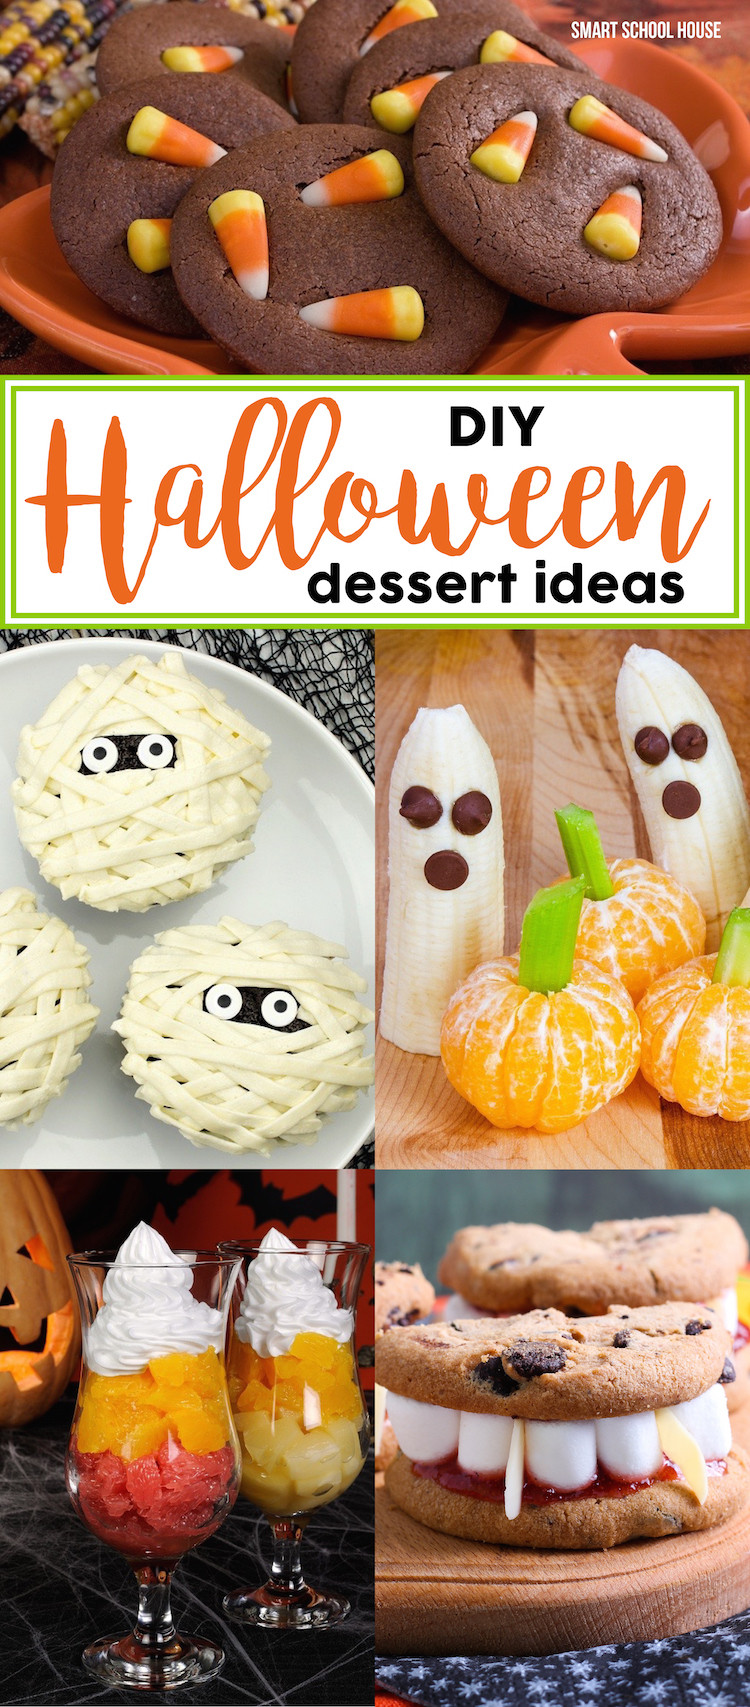 Halloween Dessert Ideas
 Halloween Dessert Ideas Page 5 of 22 Smart School House